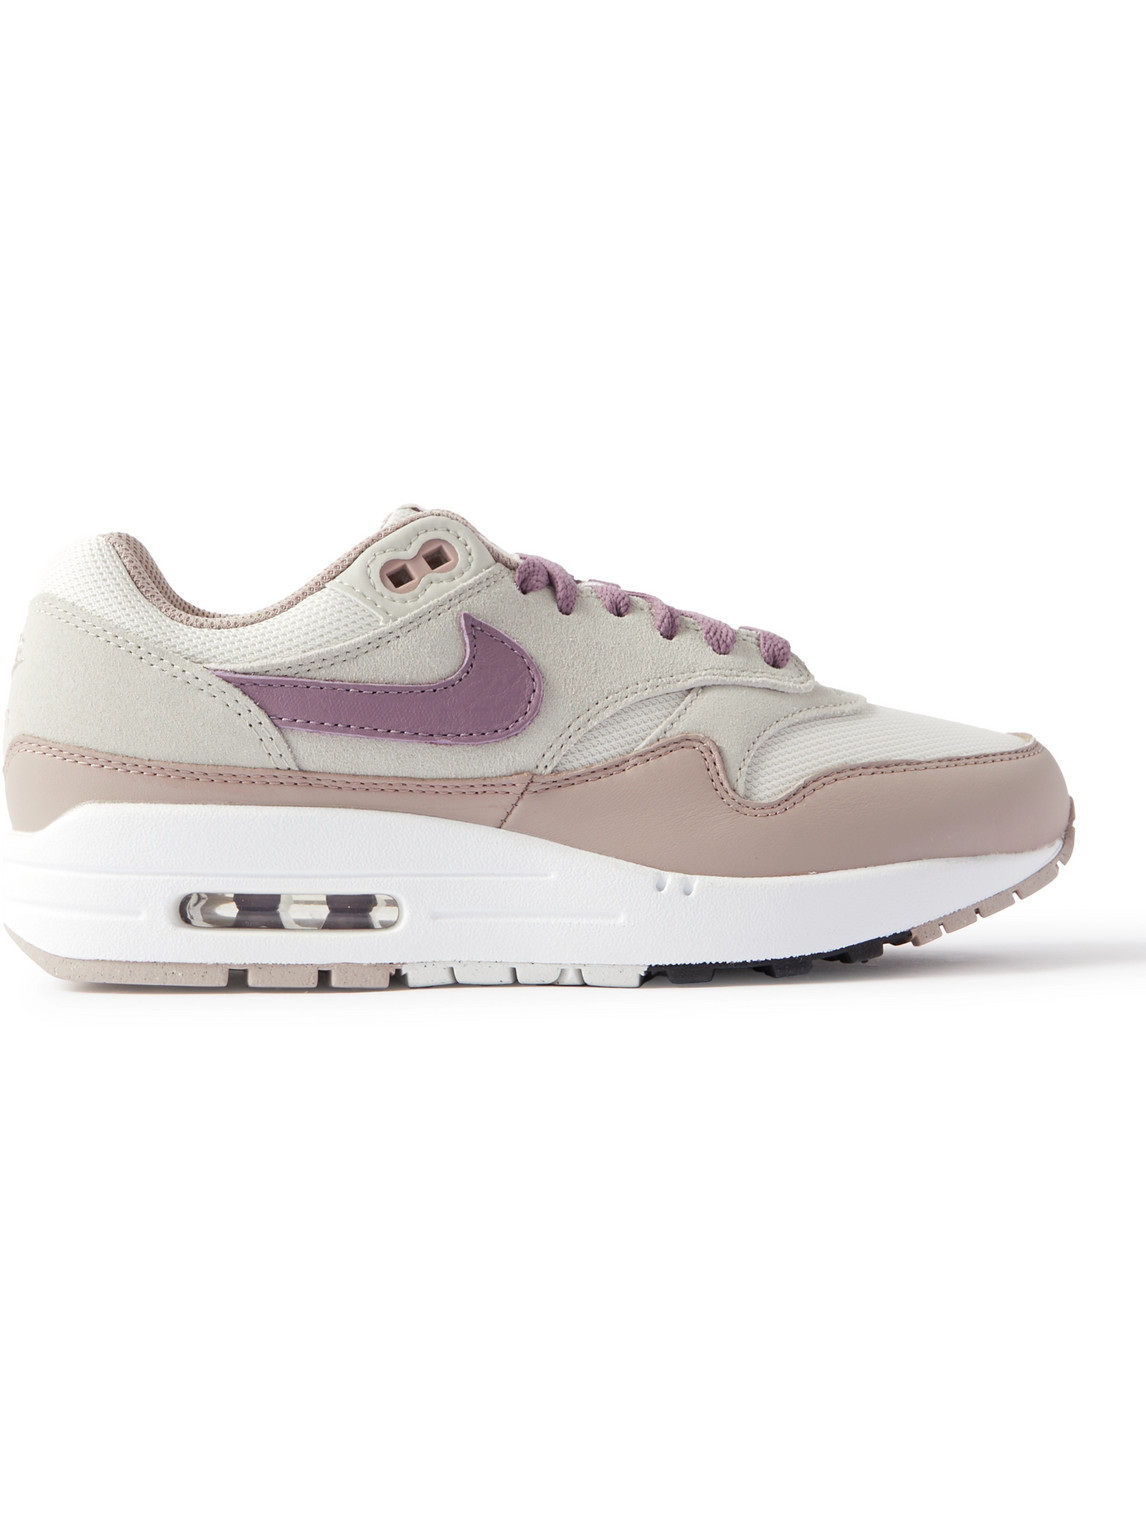 Nike Air Max 1 Sc Faux Suede, Mesh And Faux Leather Sneakers In Gray